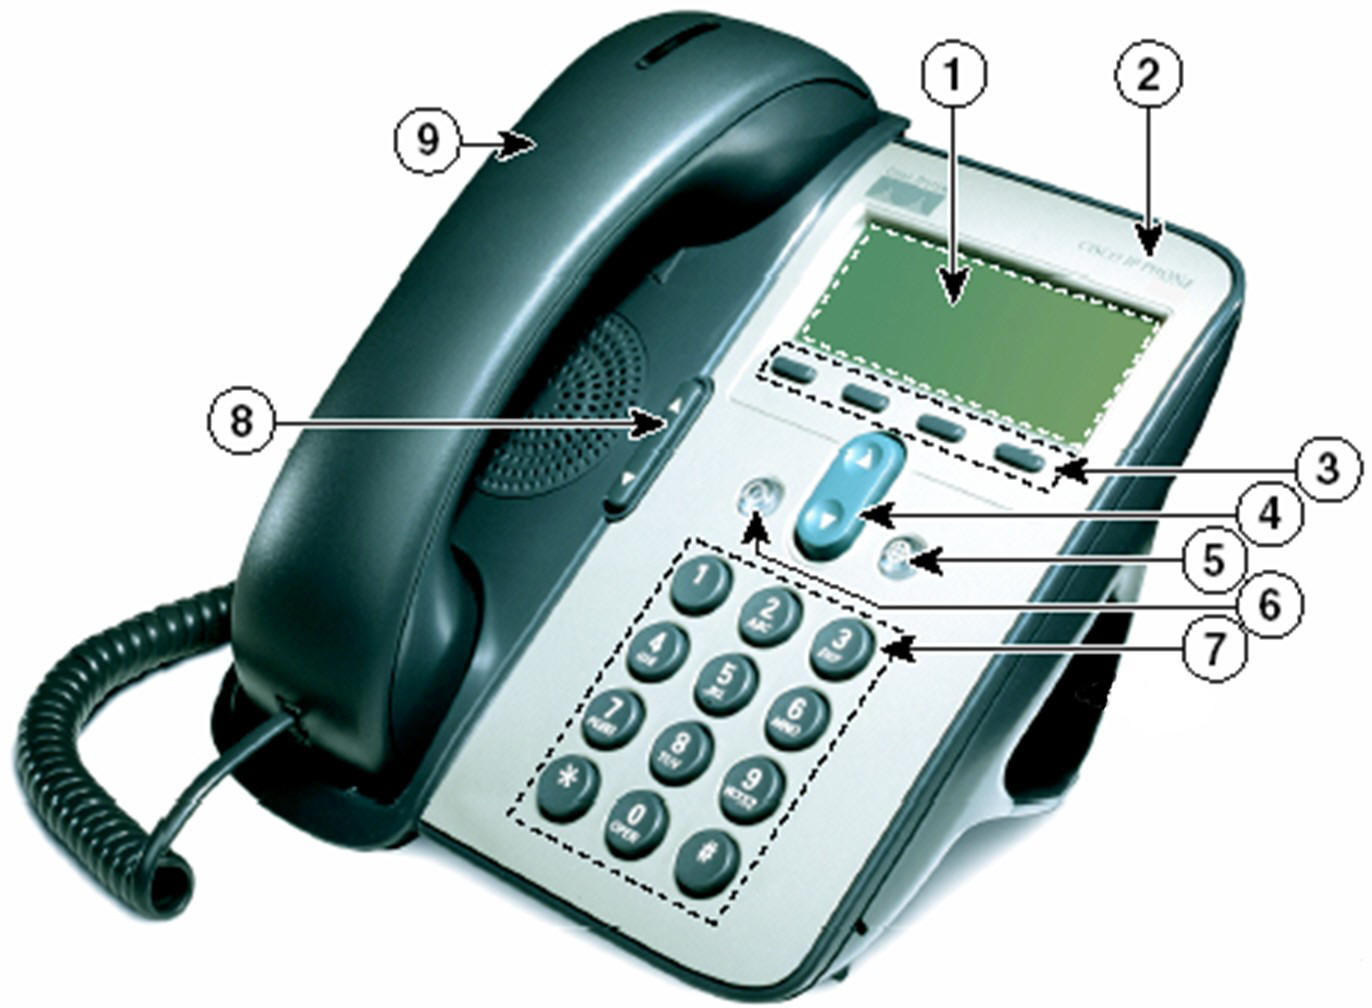 Cisco ip phone call history search